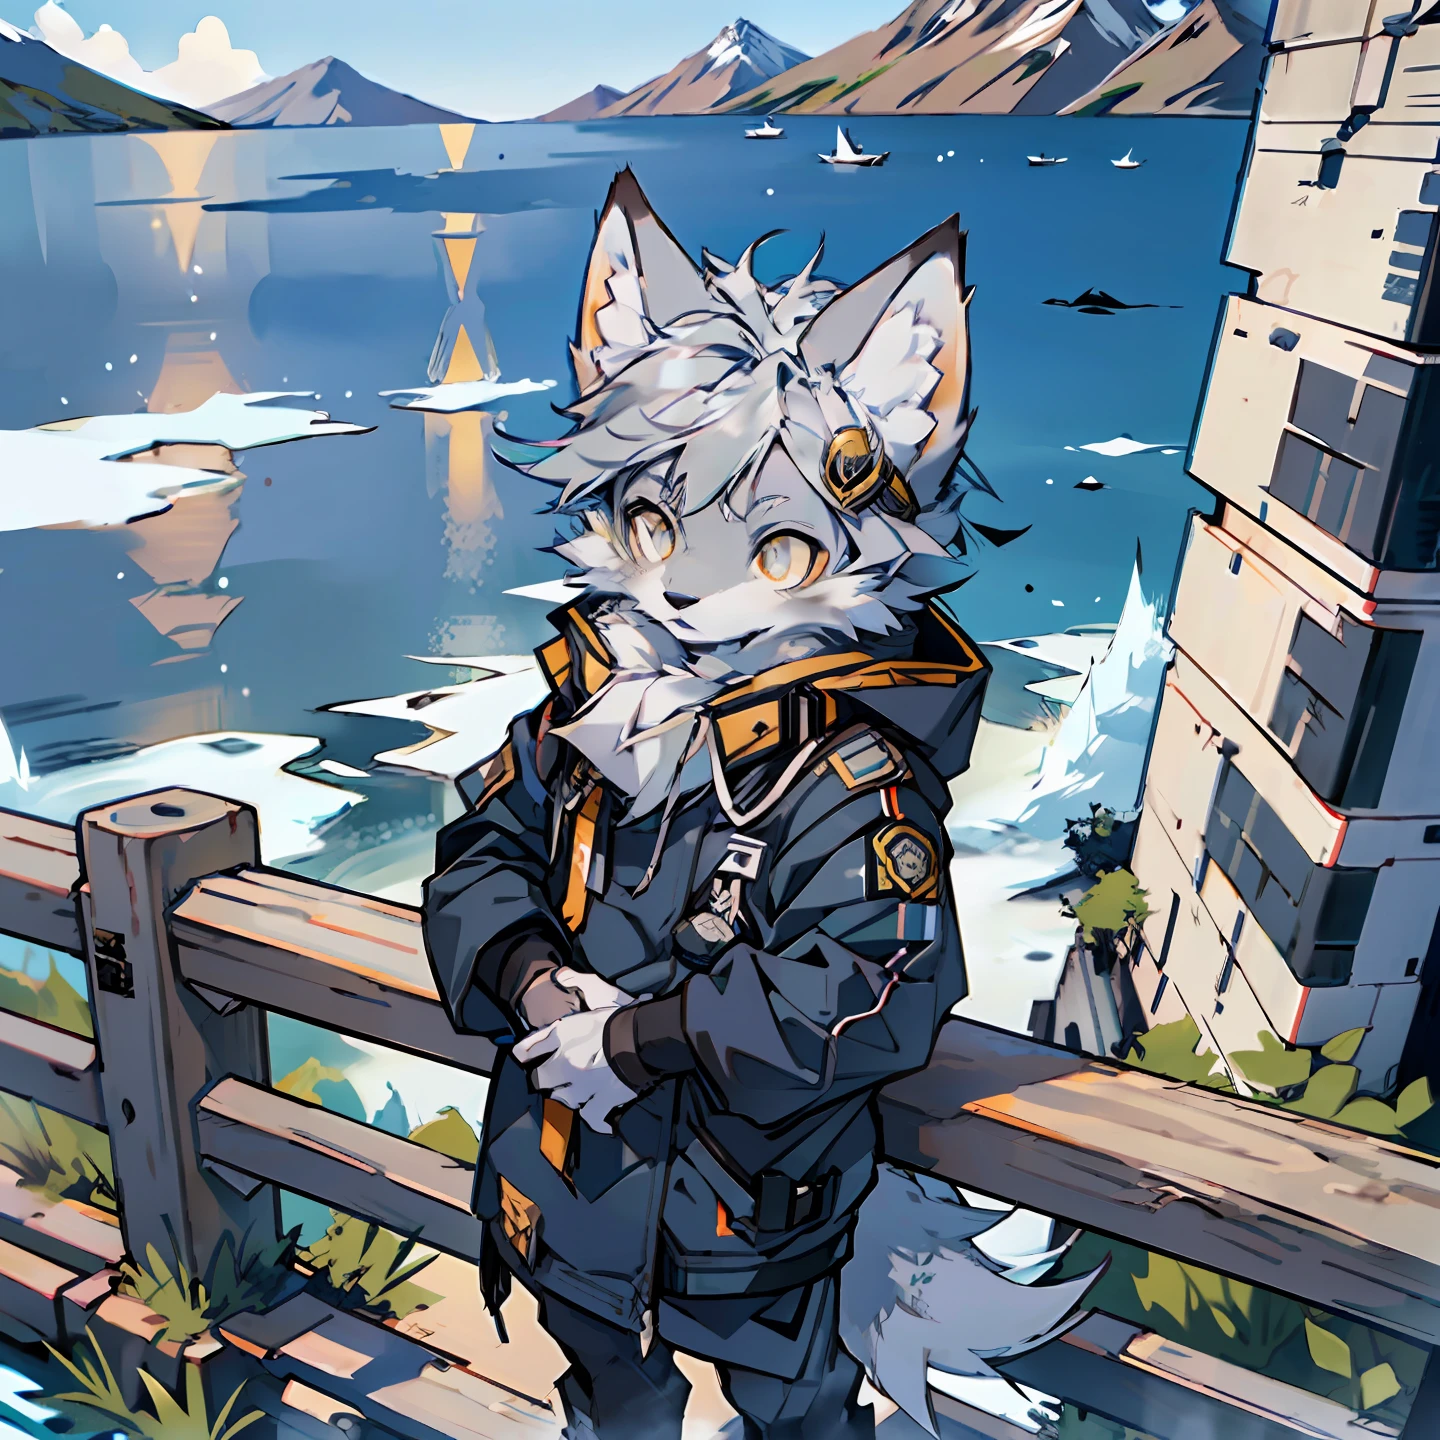 (Best Quality), (Masterpiece), ((Solitary)), (Ultra Detailed), (Furry), (Furry), (Male Arctic Fox: 1.5), (Gray Skin: 1.3), (Fluffy Tail: 1.2), (Golden Eyes), (Arctic Fox's Paws), (Grey Ears), , Sharp Focus, (Furry Feeling of Animal Ears), (((Navy Uniform)), Standing by the Sea, Standing on the Dock, Leaning against the Guardrail, Detailed Background, Detailed People